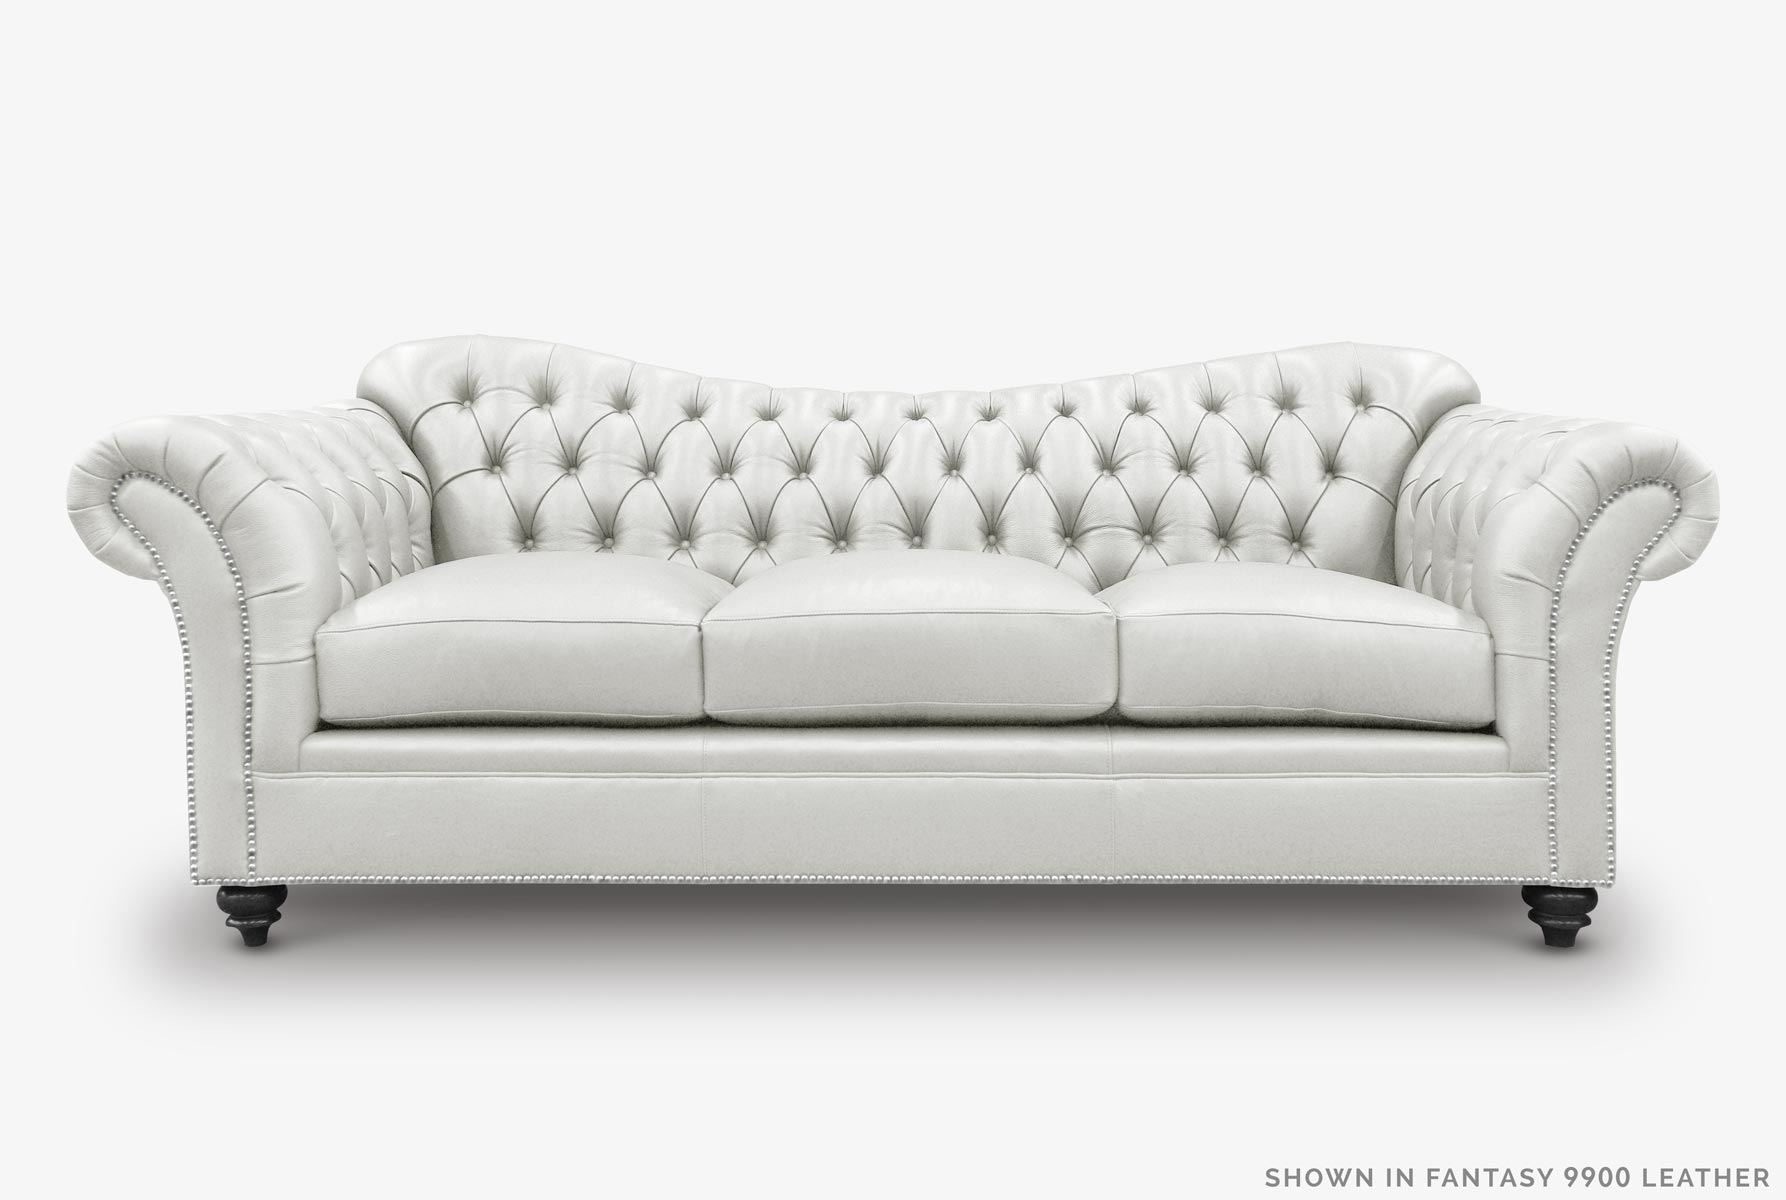 Marilyn Camelback Chesterfield Sofa in White Leather